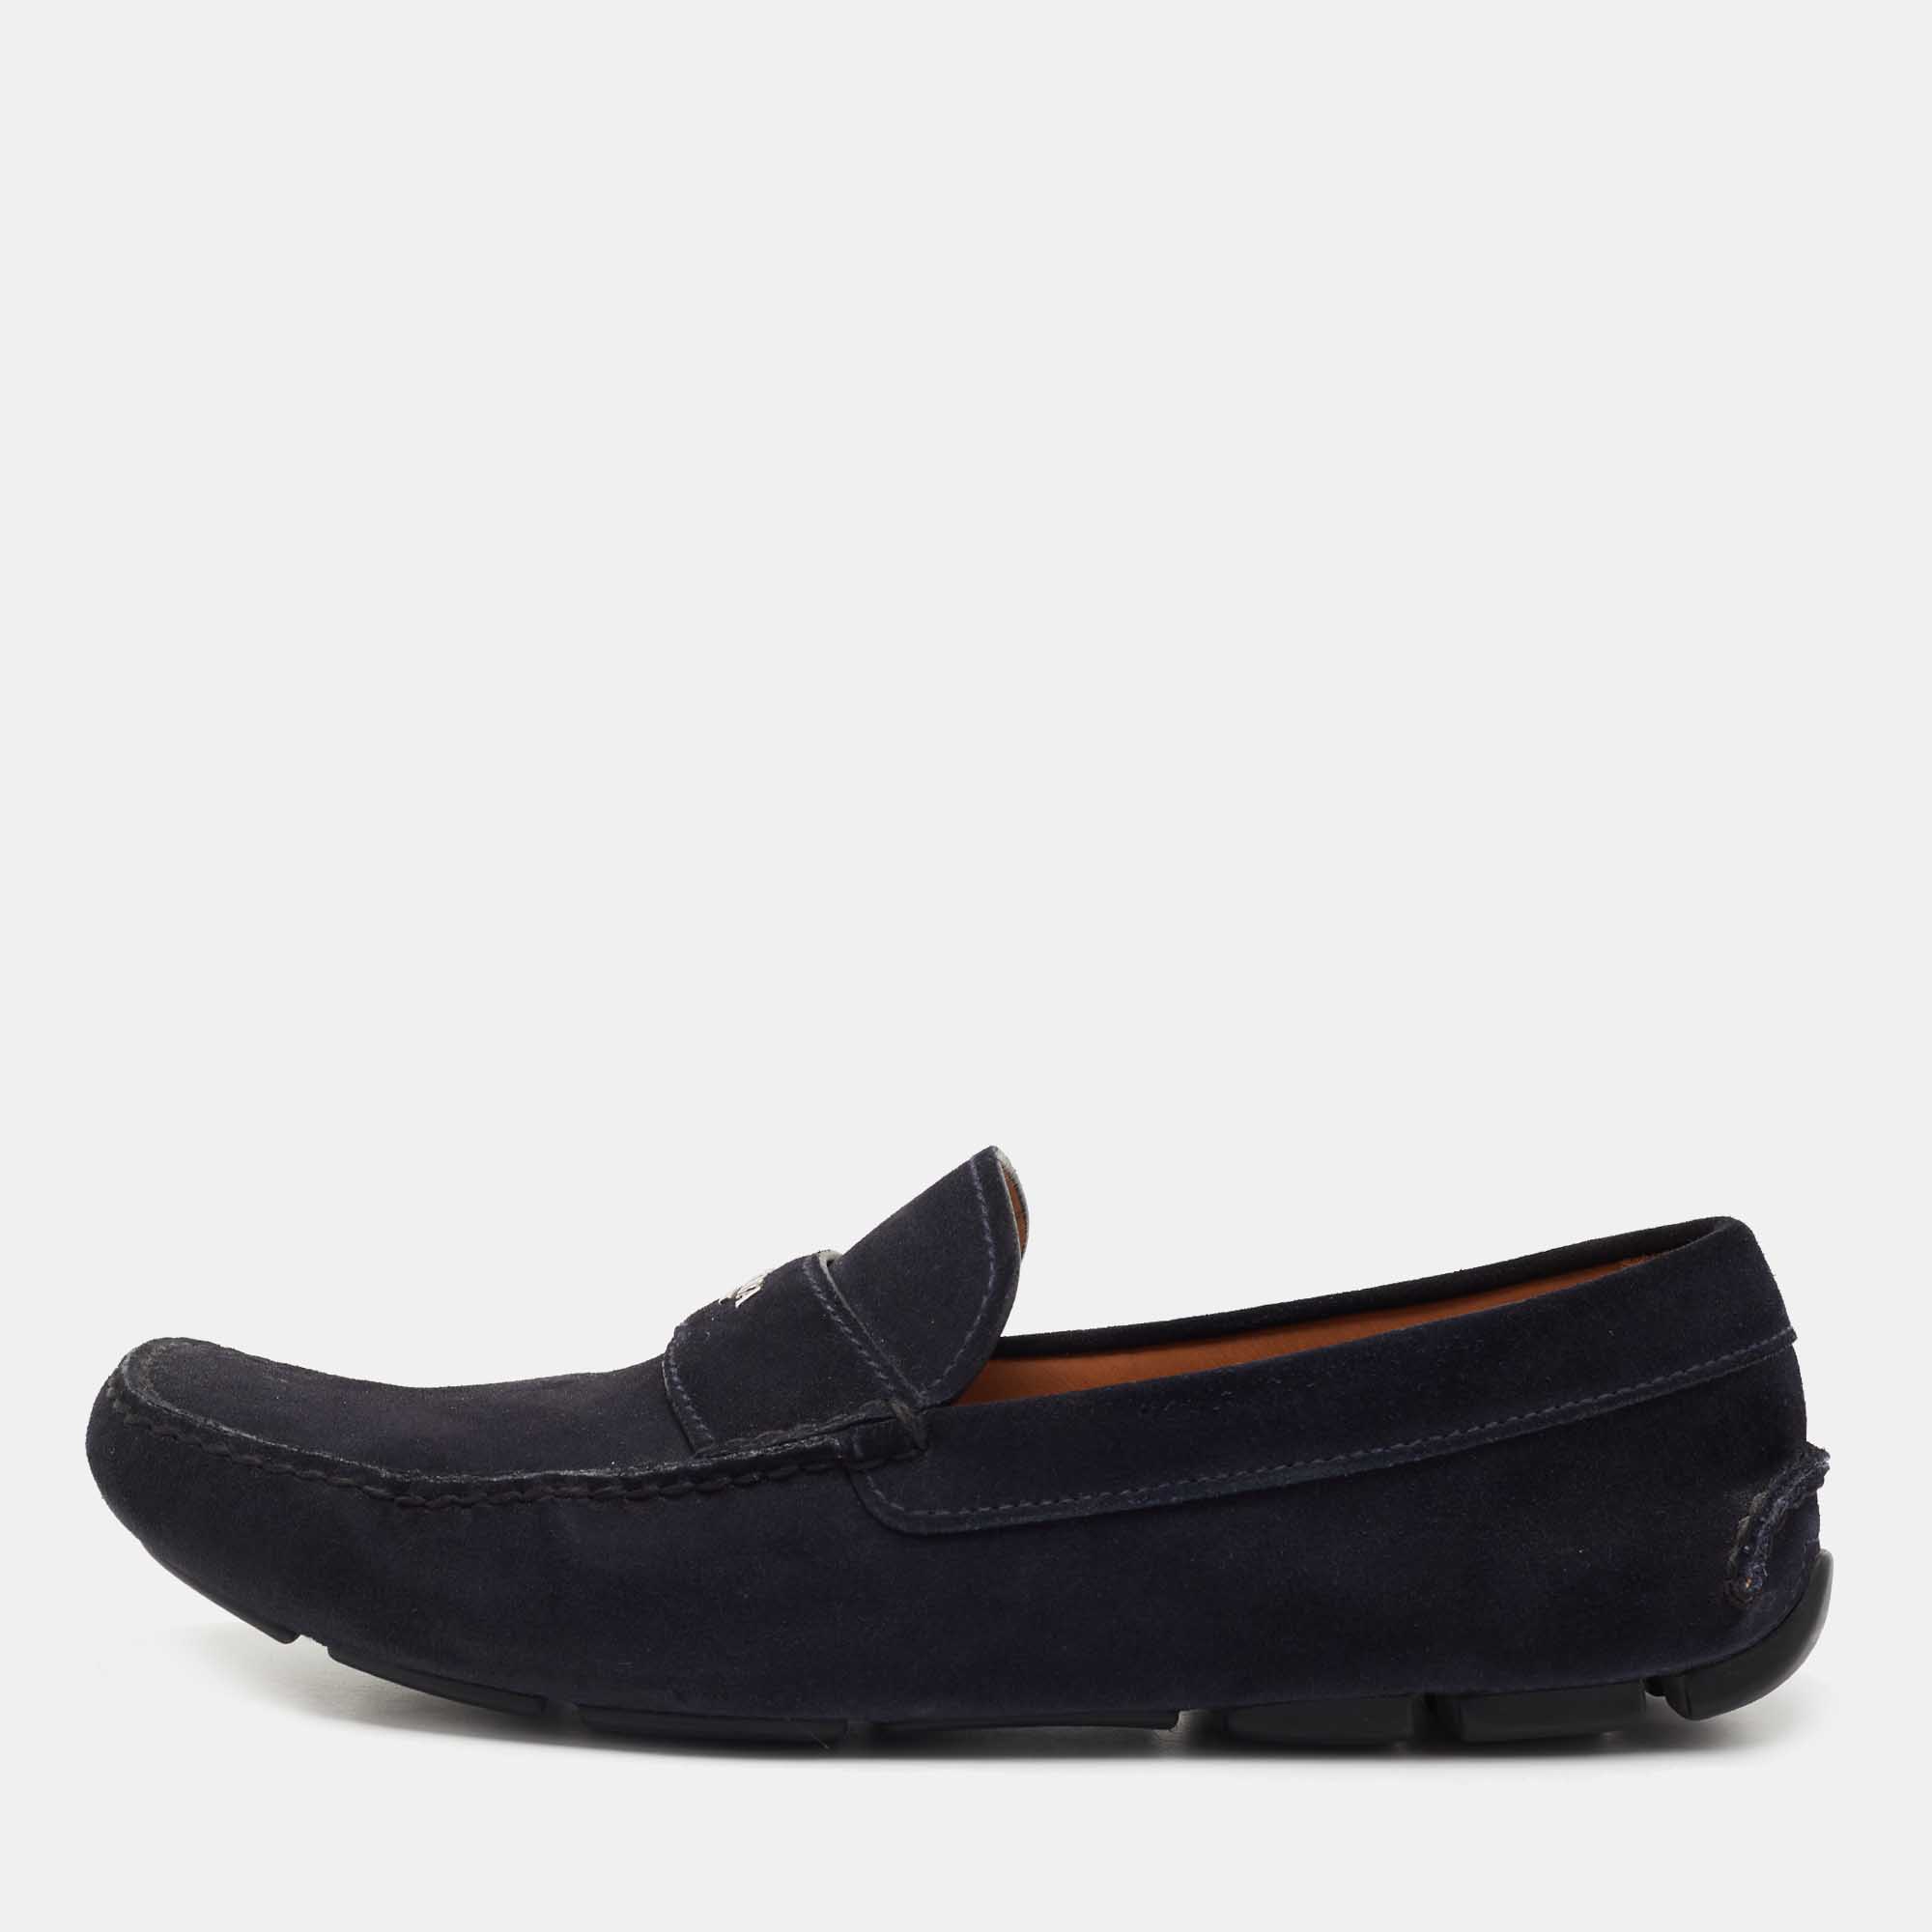 Pre-owned Prada Navy Blue Suede Slip On Loafers Size 44